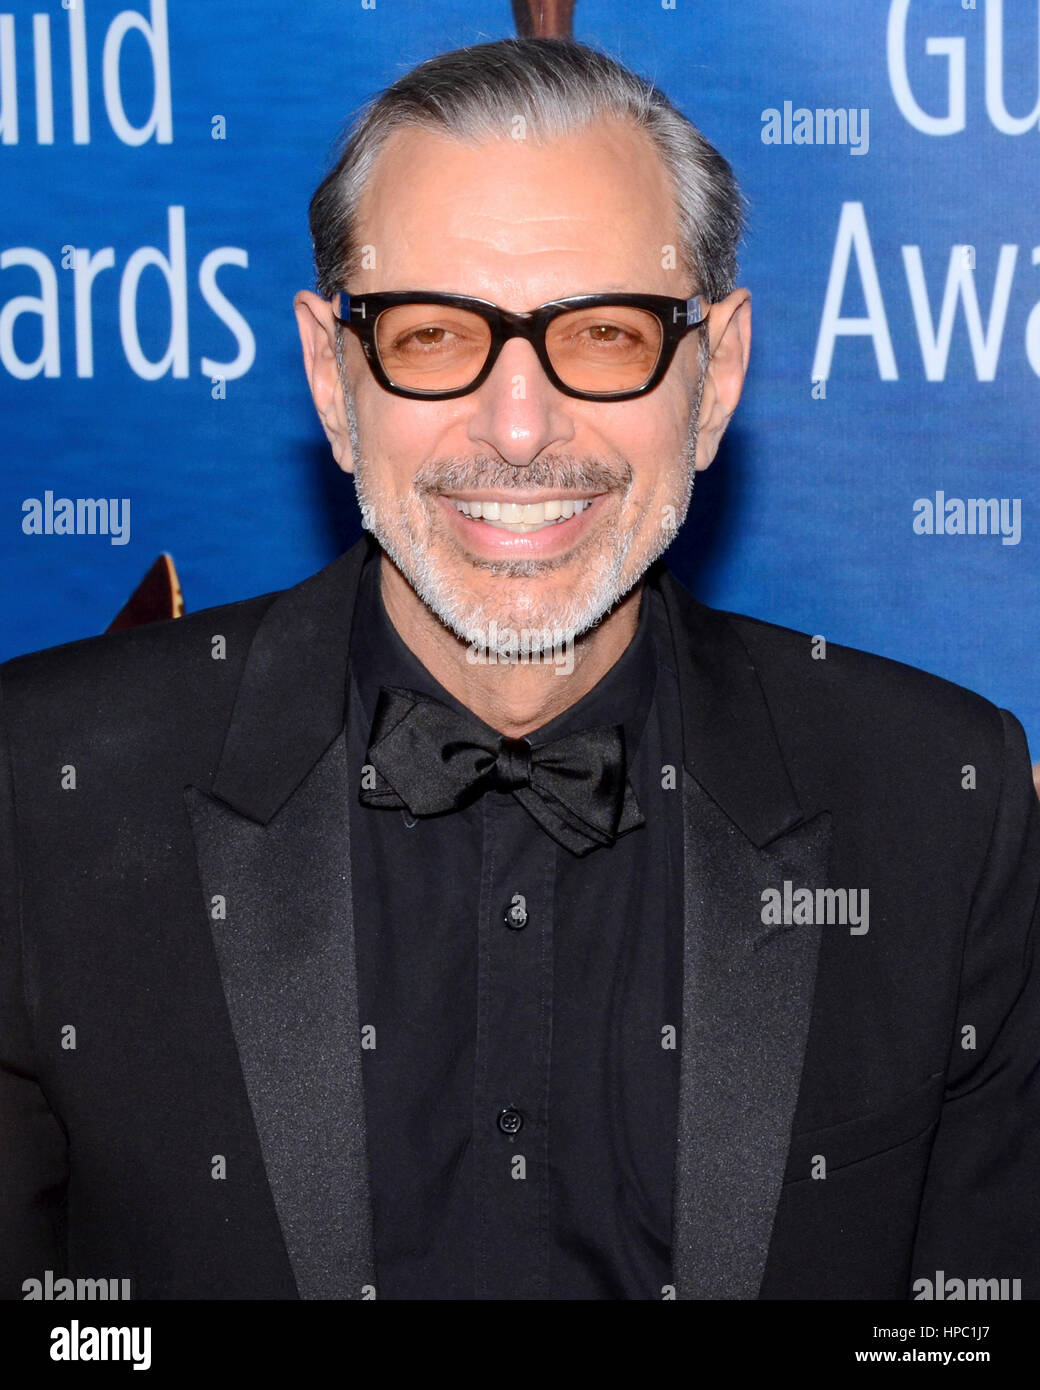 Jeff Goldblum attend the 2017 Writers Guild Awards L.A. Ceremony at The Beverly Hilton Hotel in Beverly Hills, California on February 19, 2017. Stock Photo